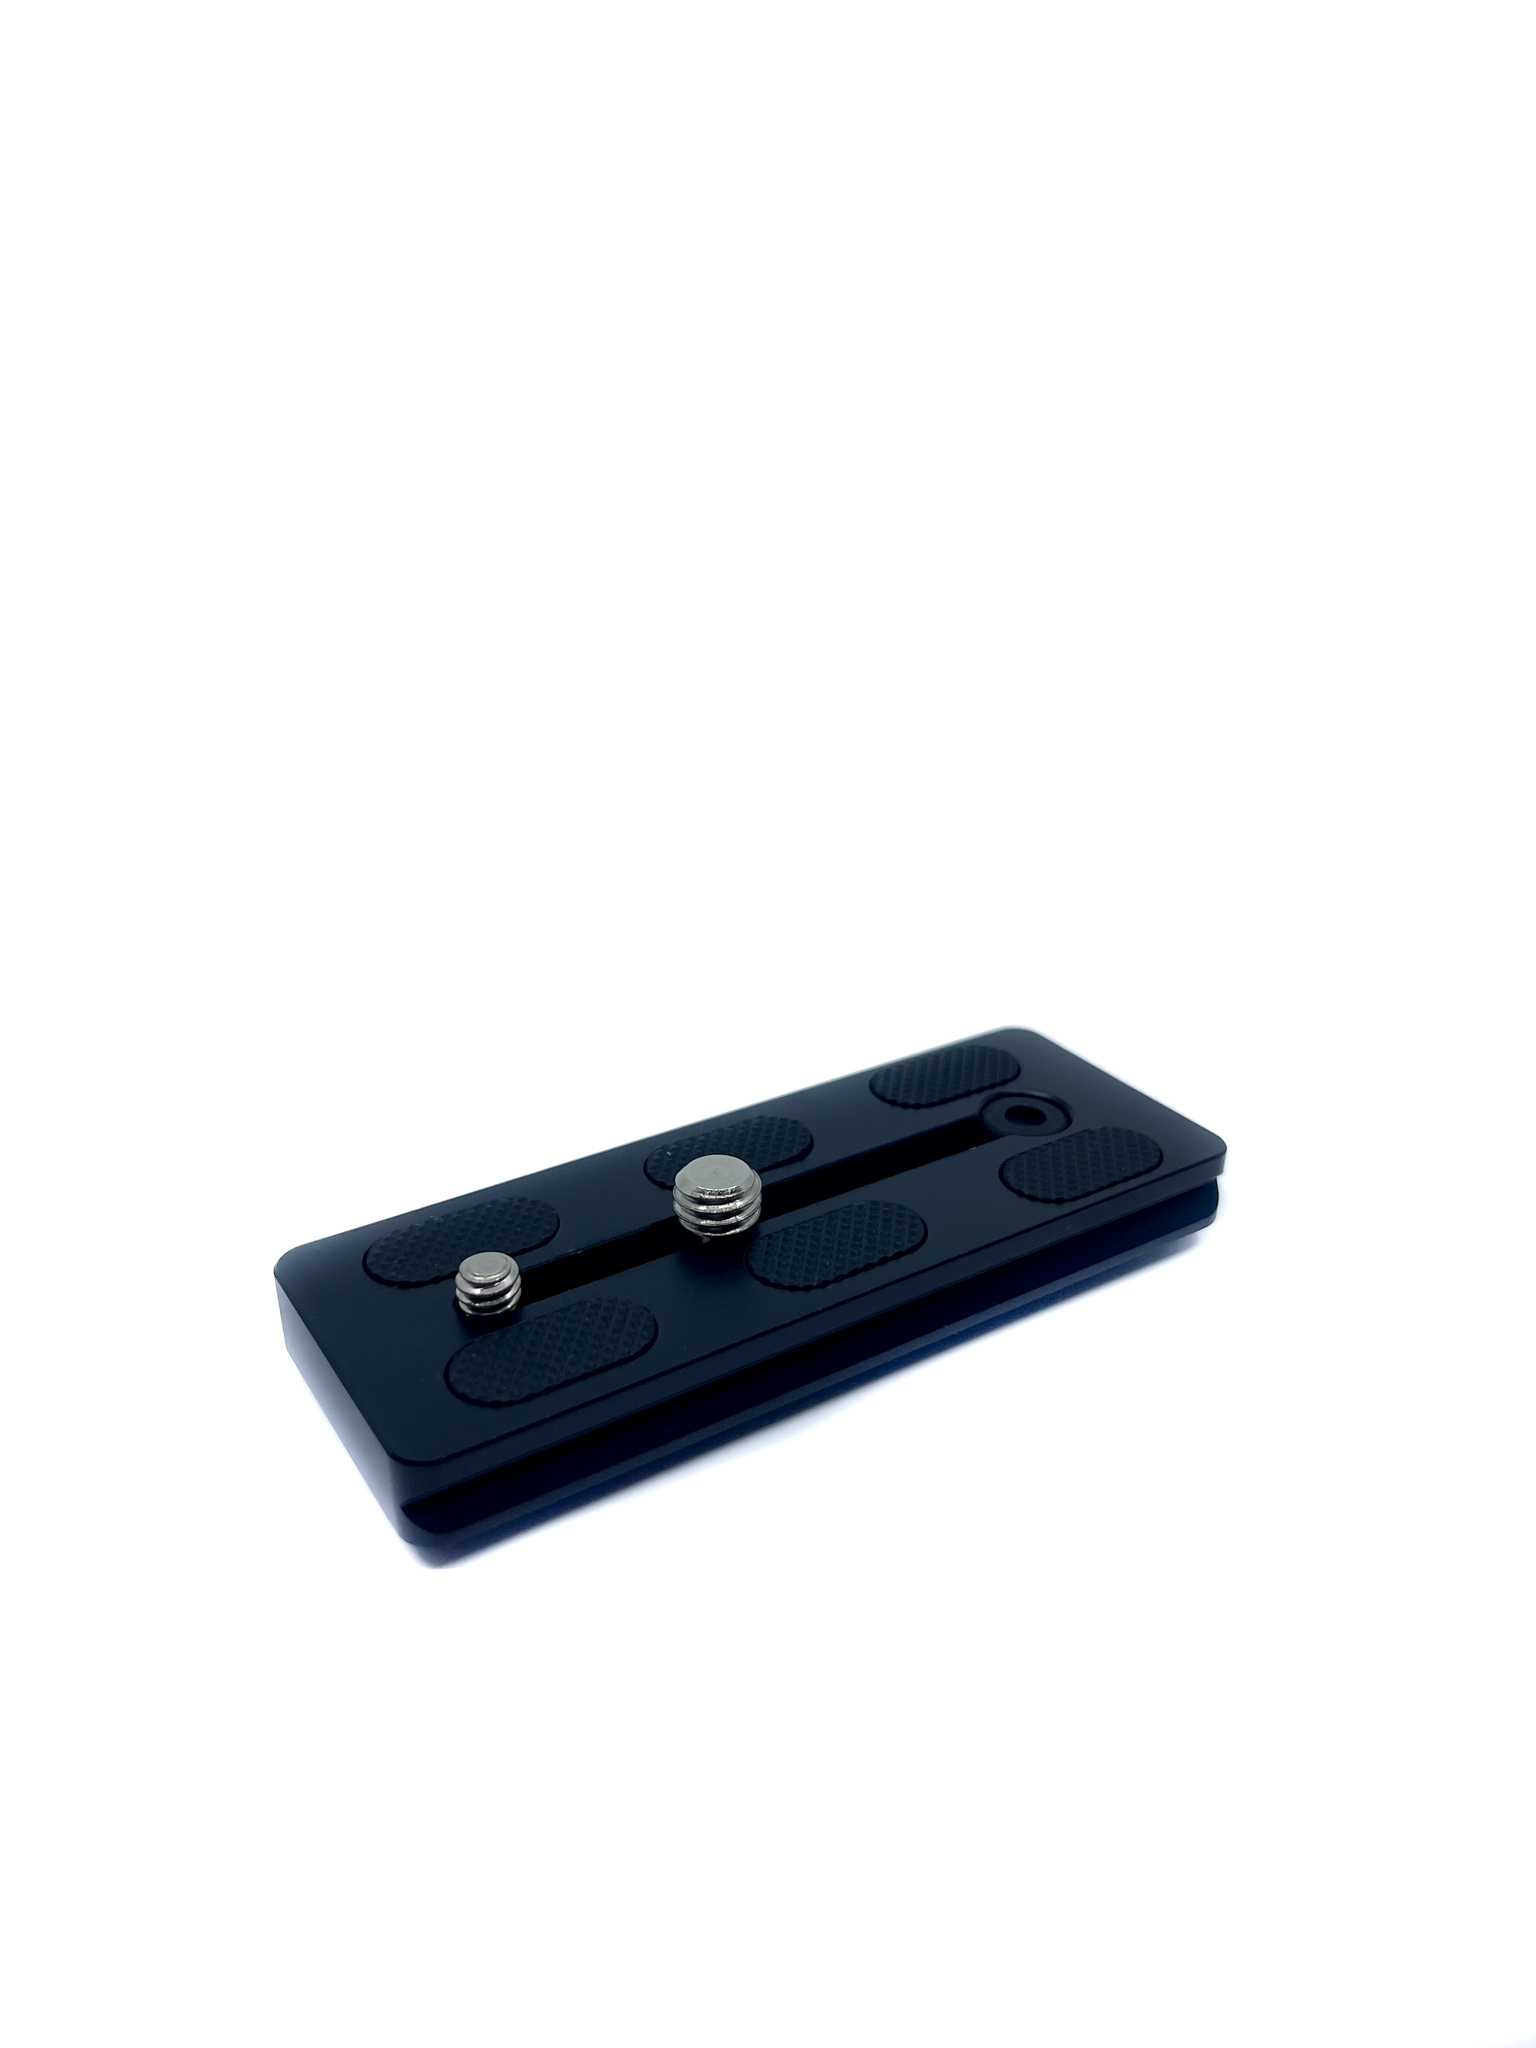 Quick release plate 100x38mm 1/4 inch with rubber buffer